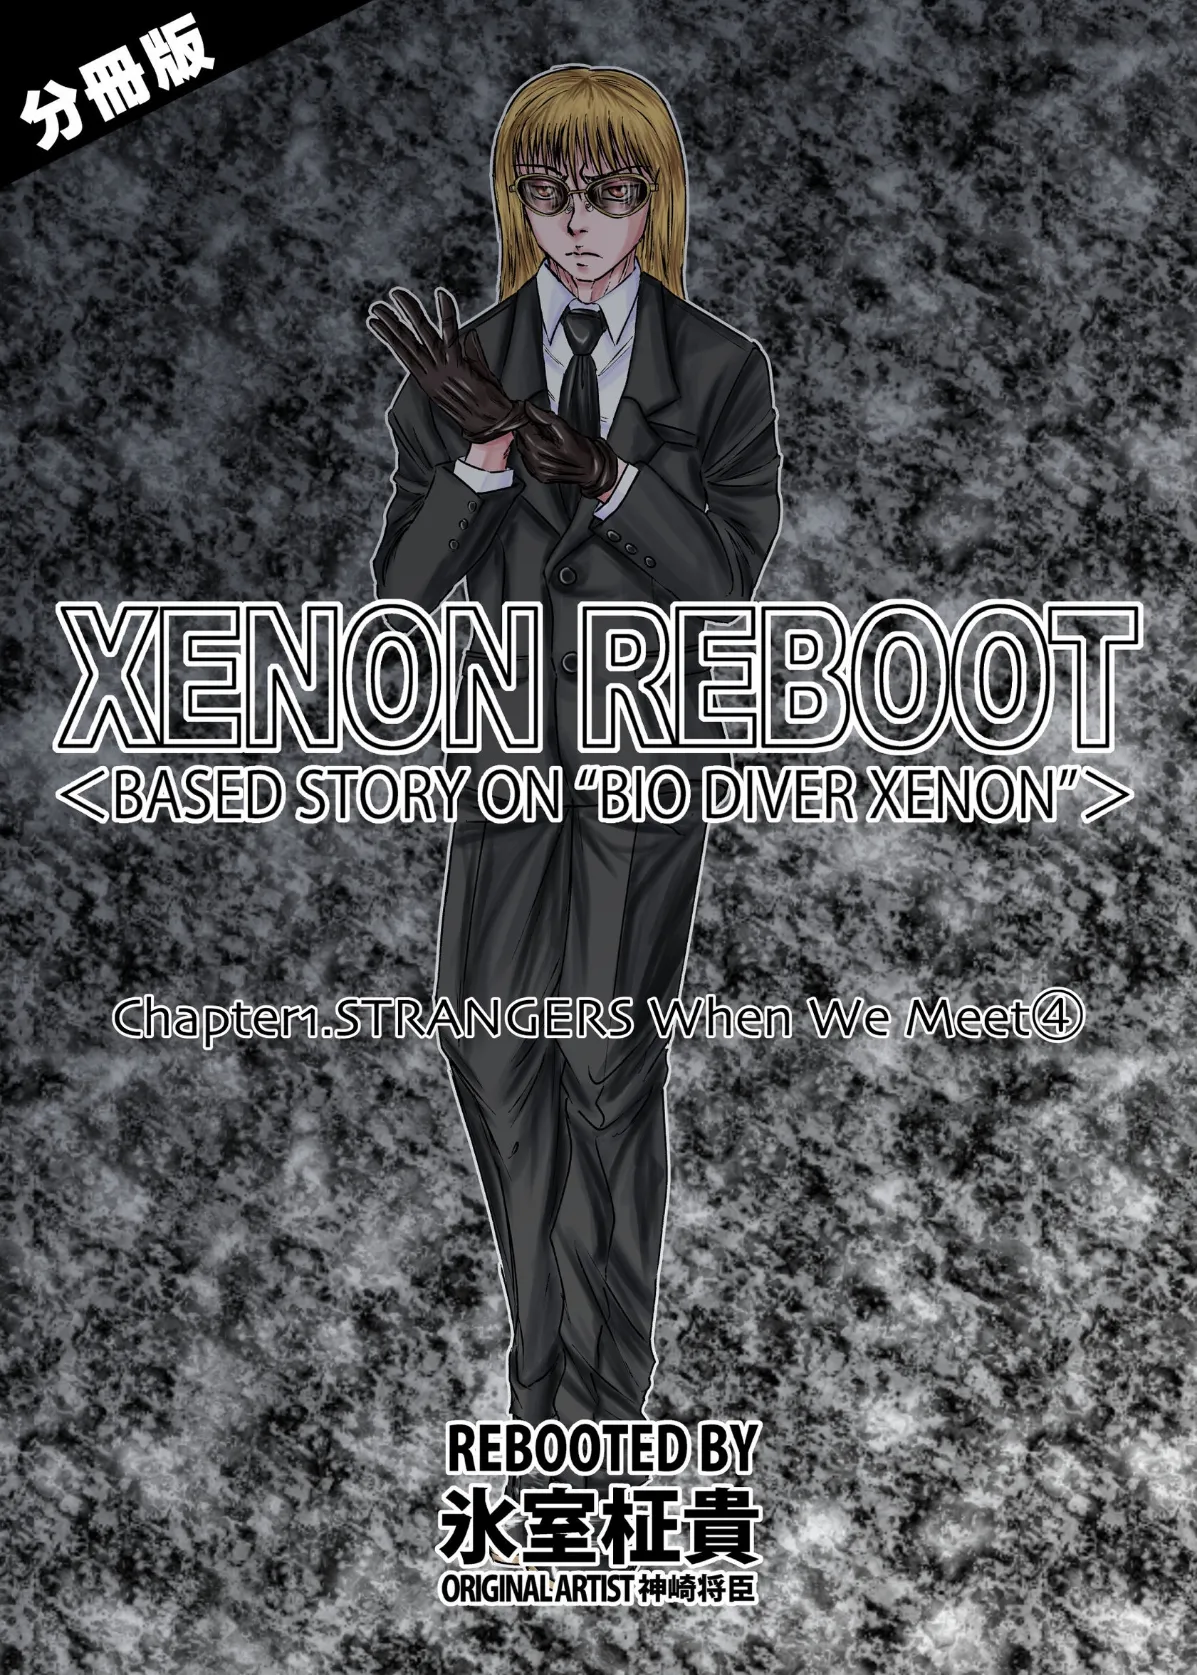 XENON REBOOT＜BASED STORY ON ’BIO DIVER XENON’＞【分冊版】 Chapter1 STRANGERS When We Meet（4）